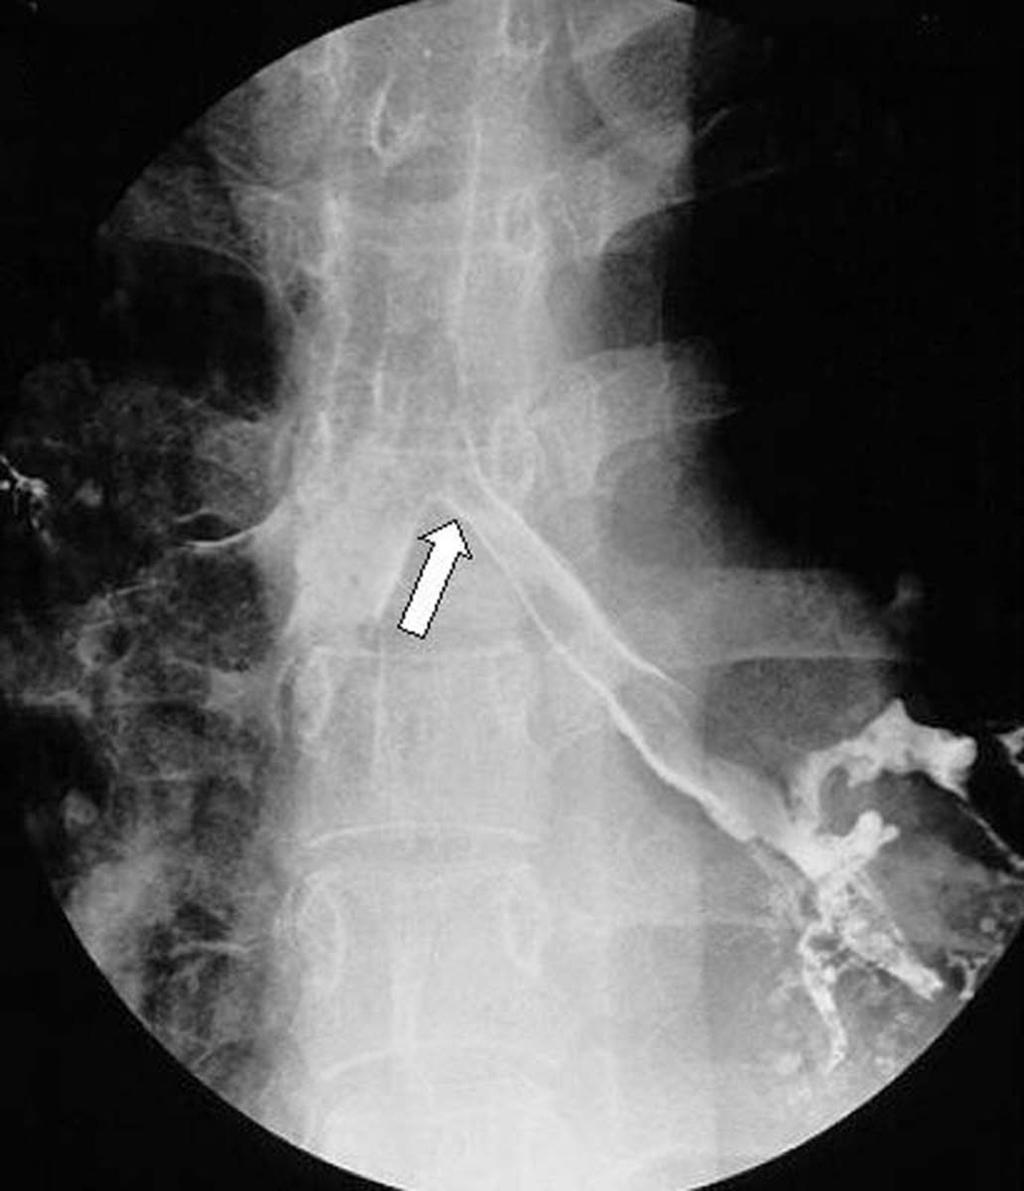 Indications for Tracheobronchial Stent Placement Malignant enign ronchogenic carcinoma Intraluminal lesion Extraluminal lesion Primary airway tumor Squamous cell carcinoma denoid cystic